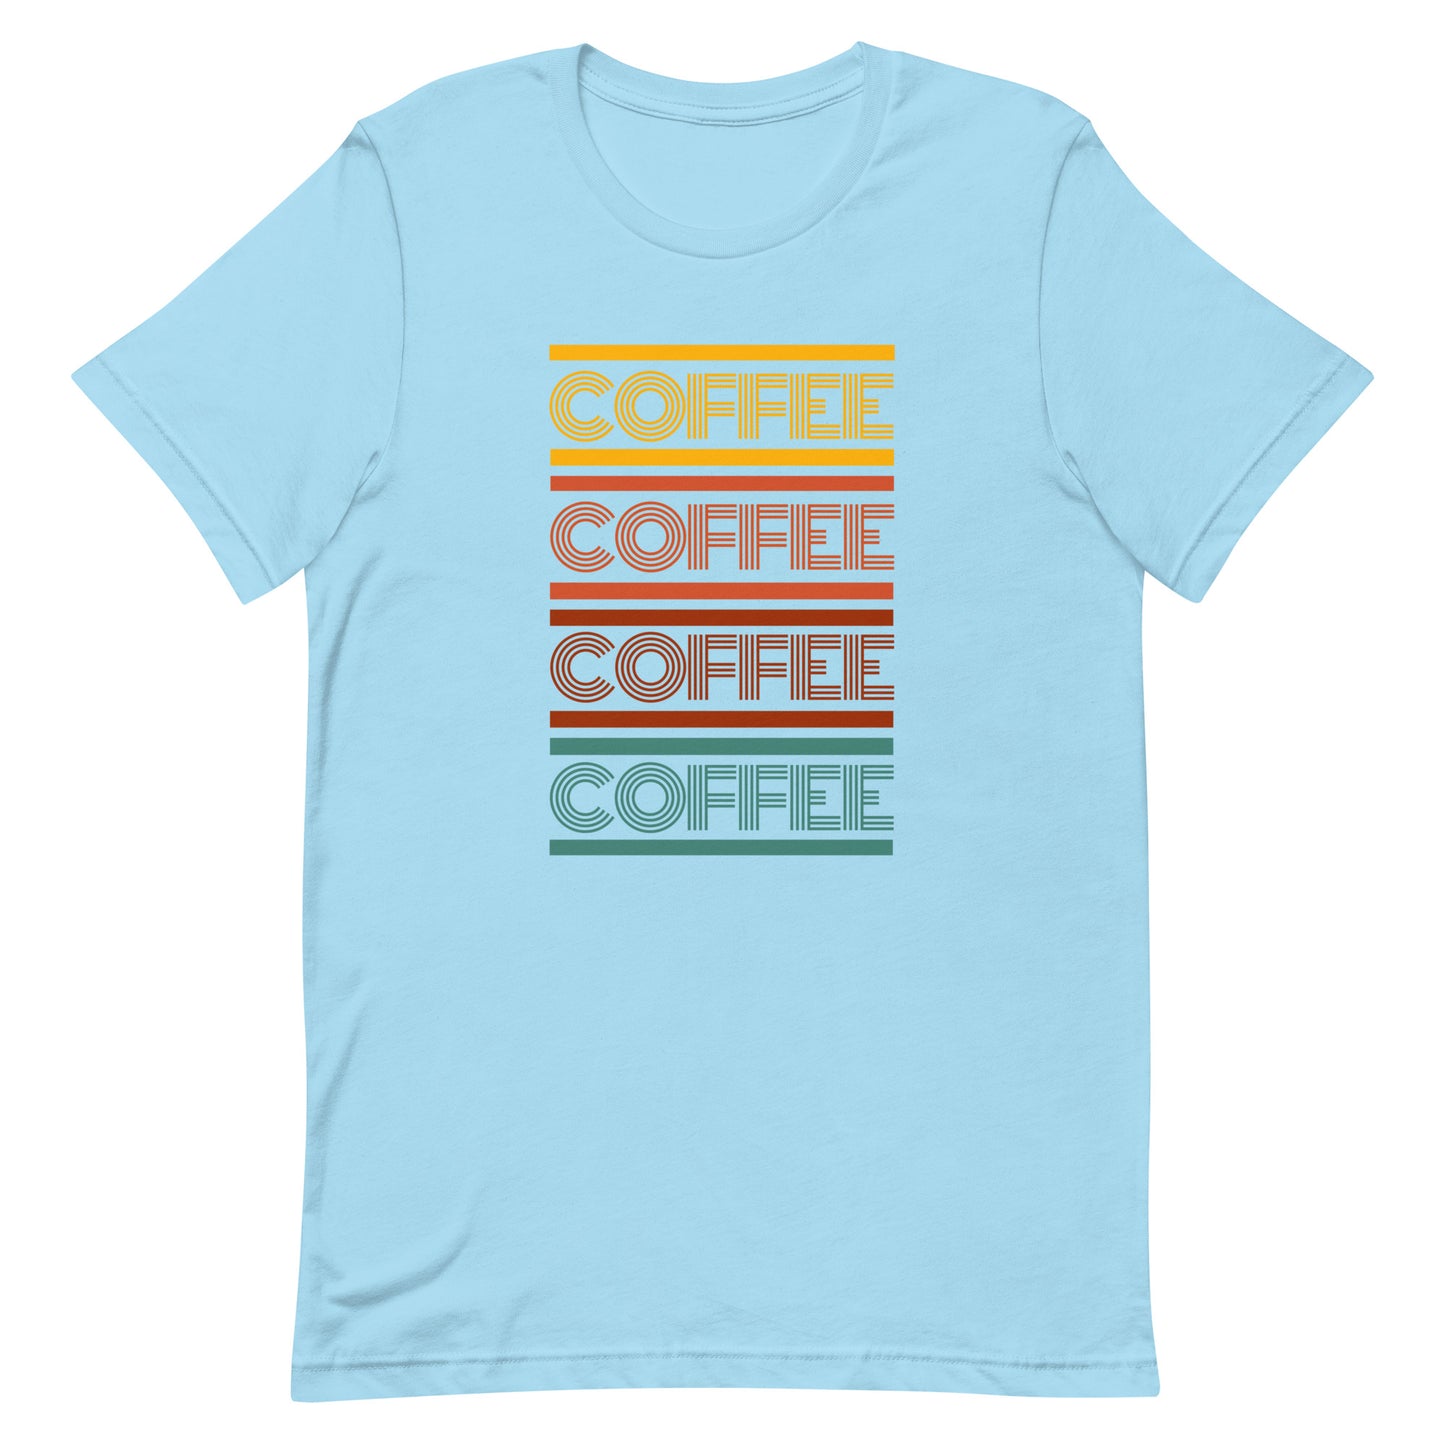 An ocean blue coffee t-shirt that has the words coffee repeated in a retro inspired font.